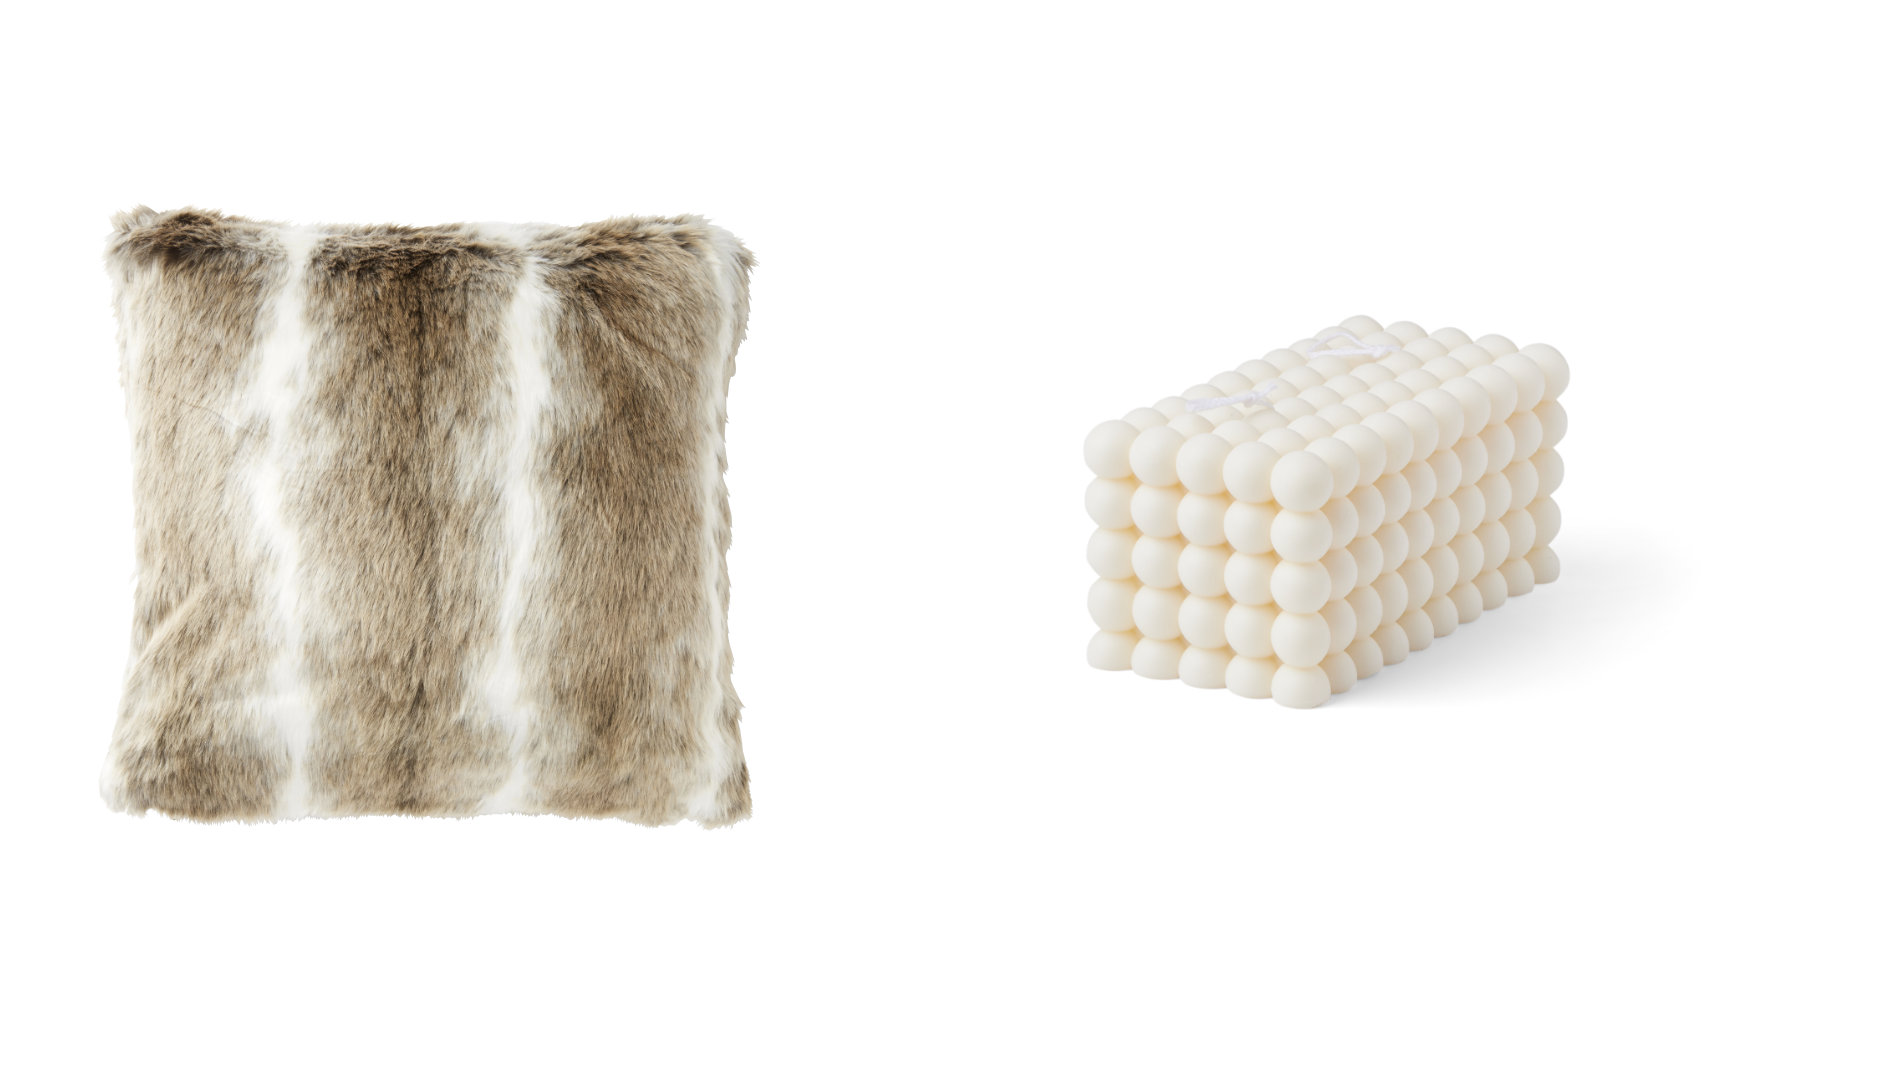 The fluffy faux-fur cushions by Skinnwille and the bubble candles by Vivi. create a cosy feel-good atmosphere. Photos: Skinnwille and by Vivi.